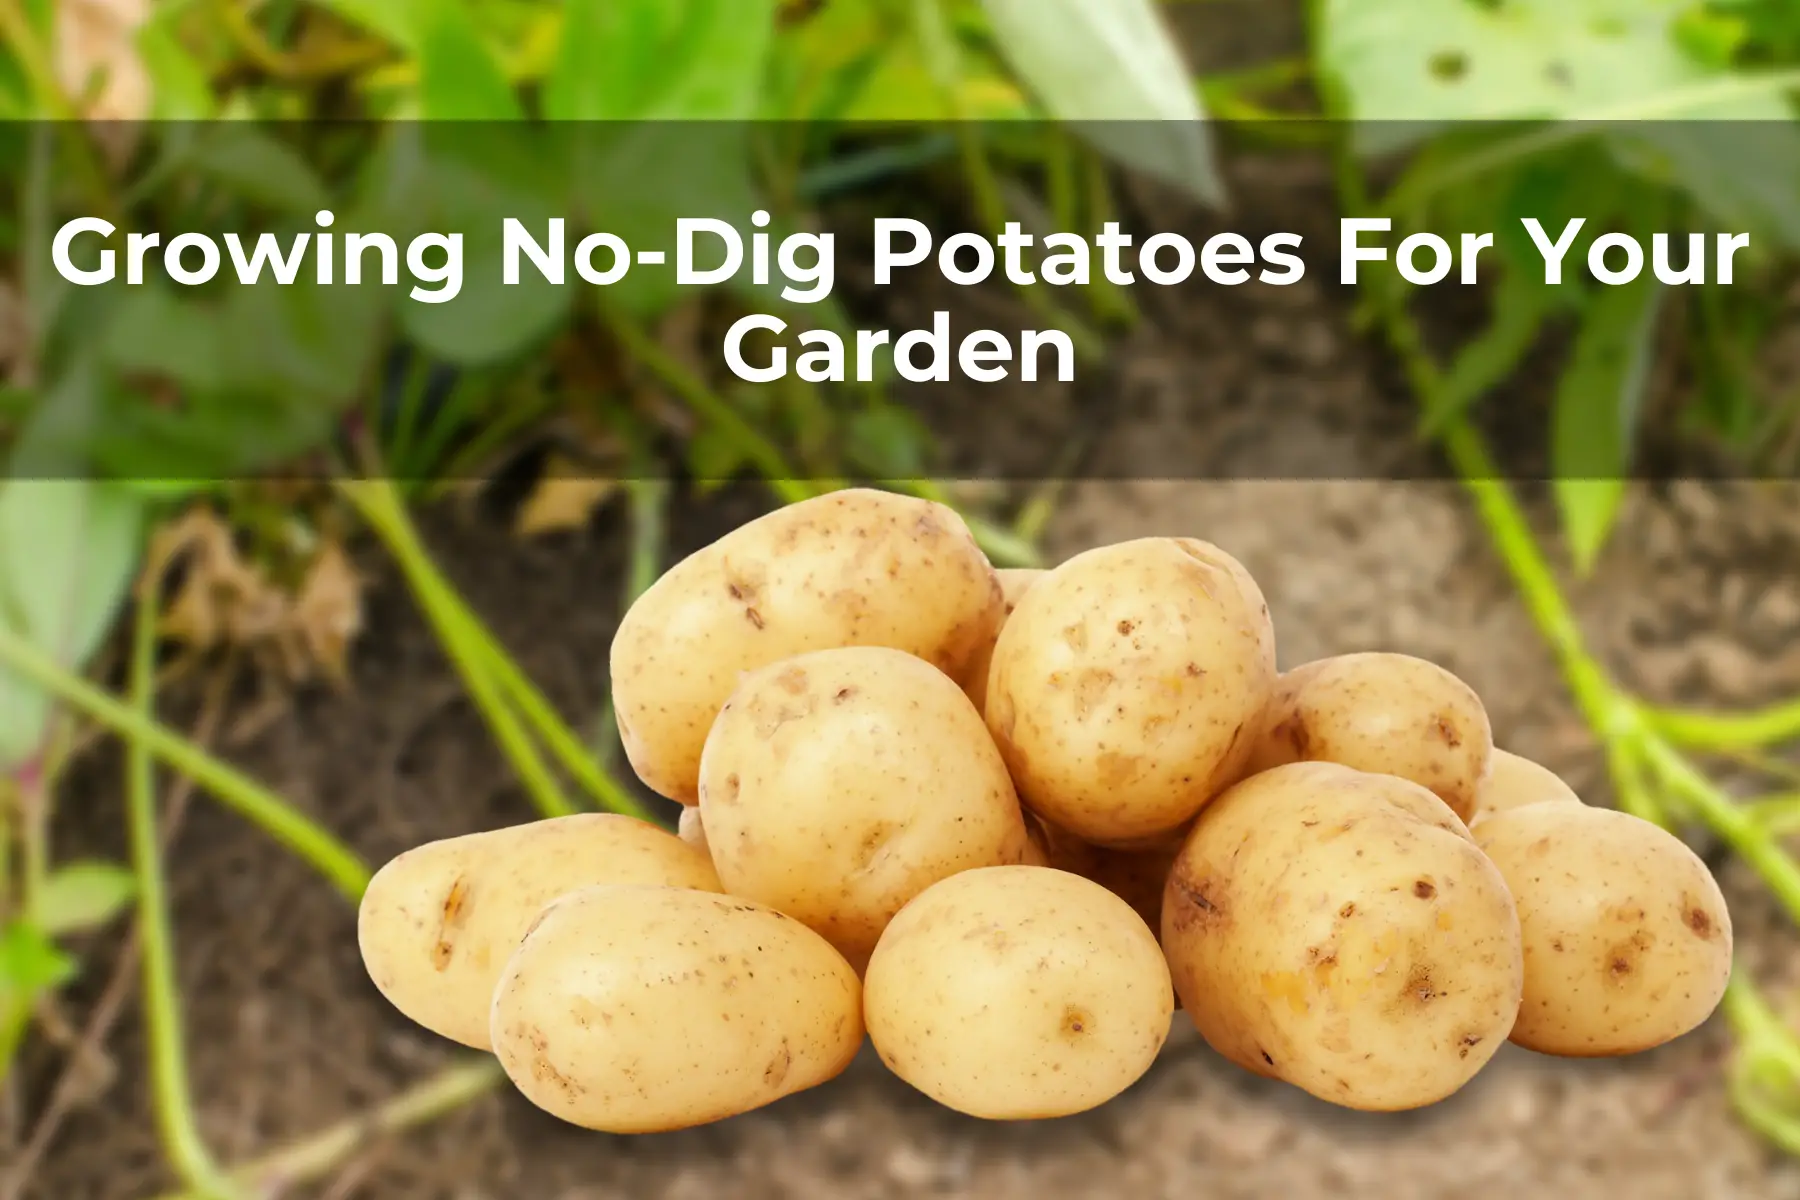 Growing No-Dig Potatoes For Your Garden